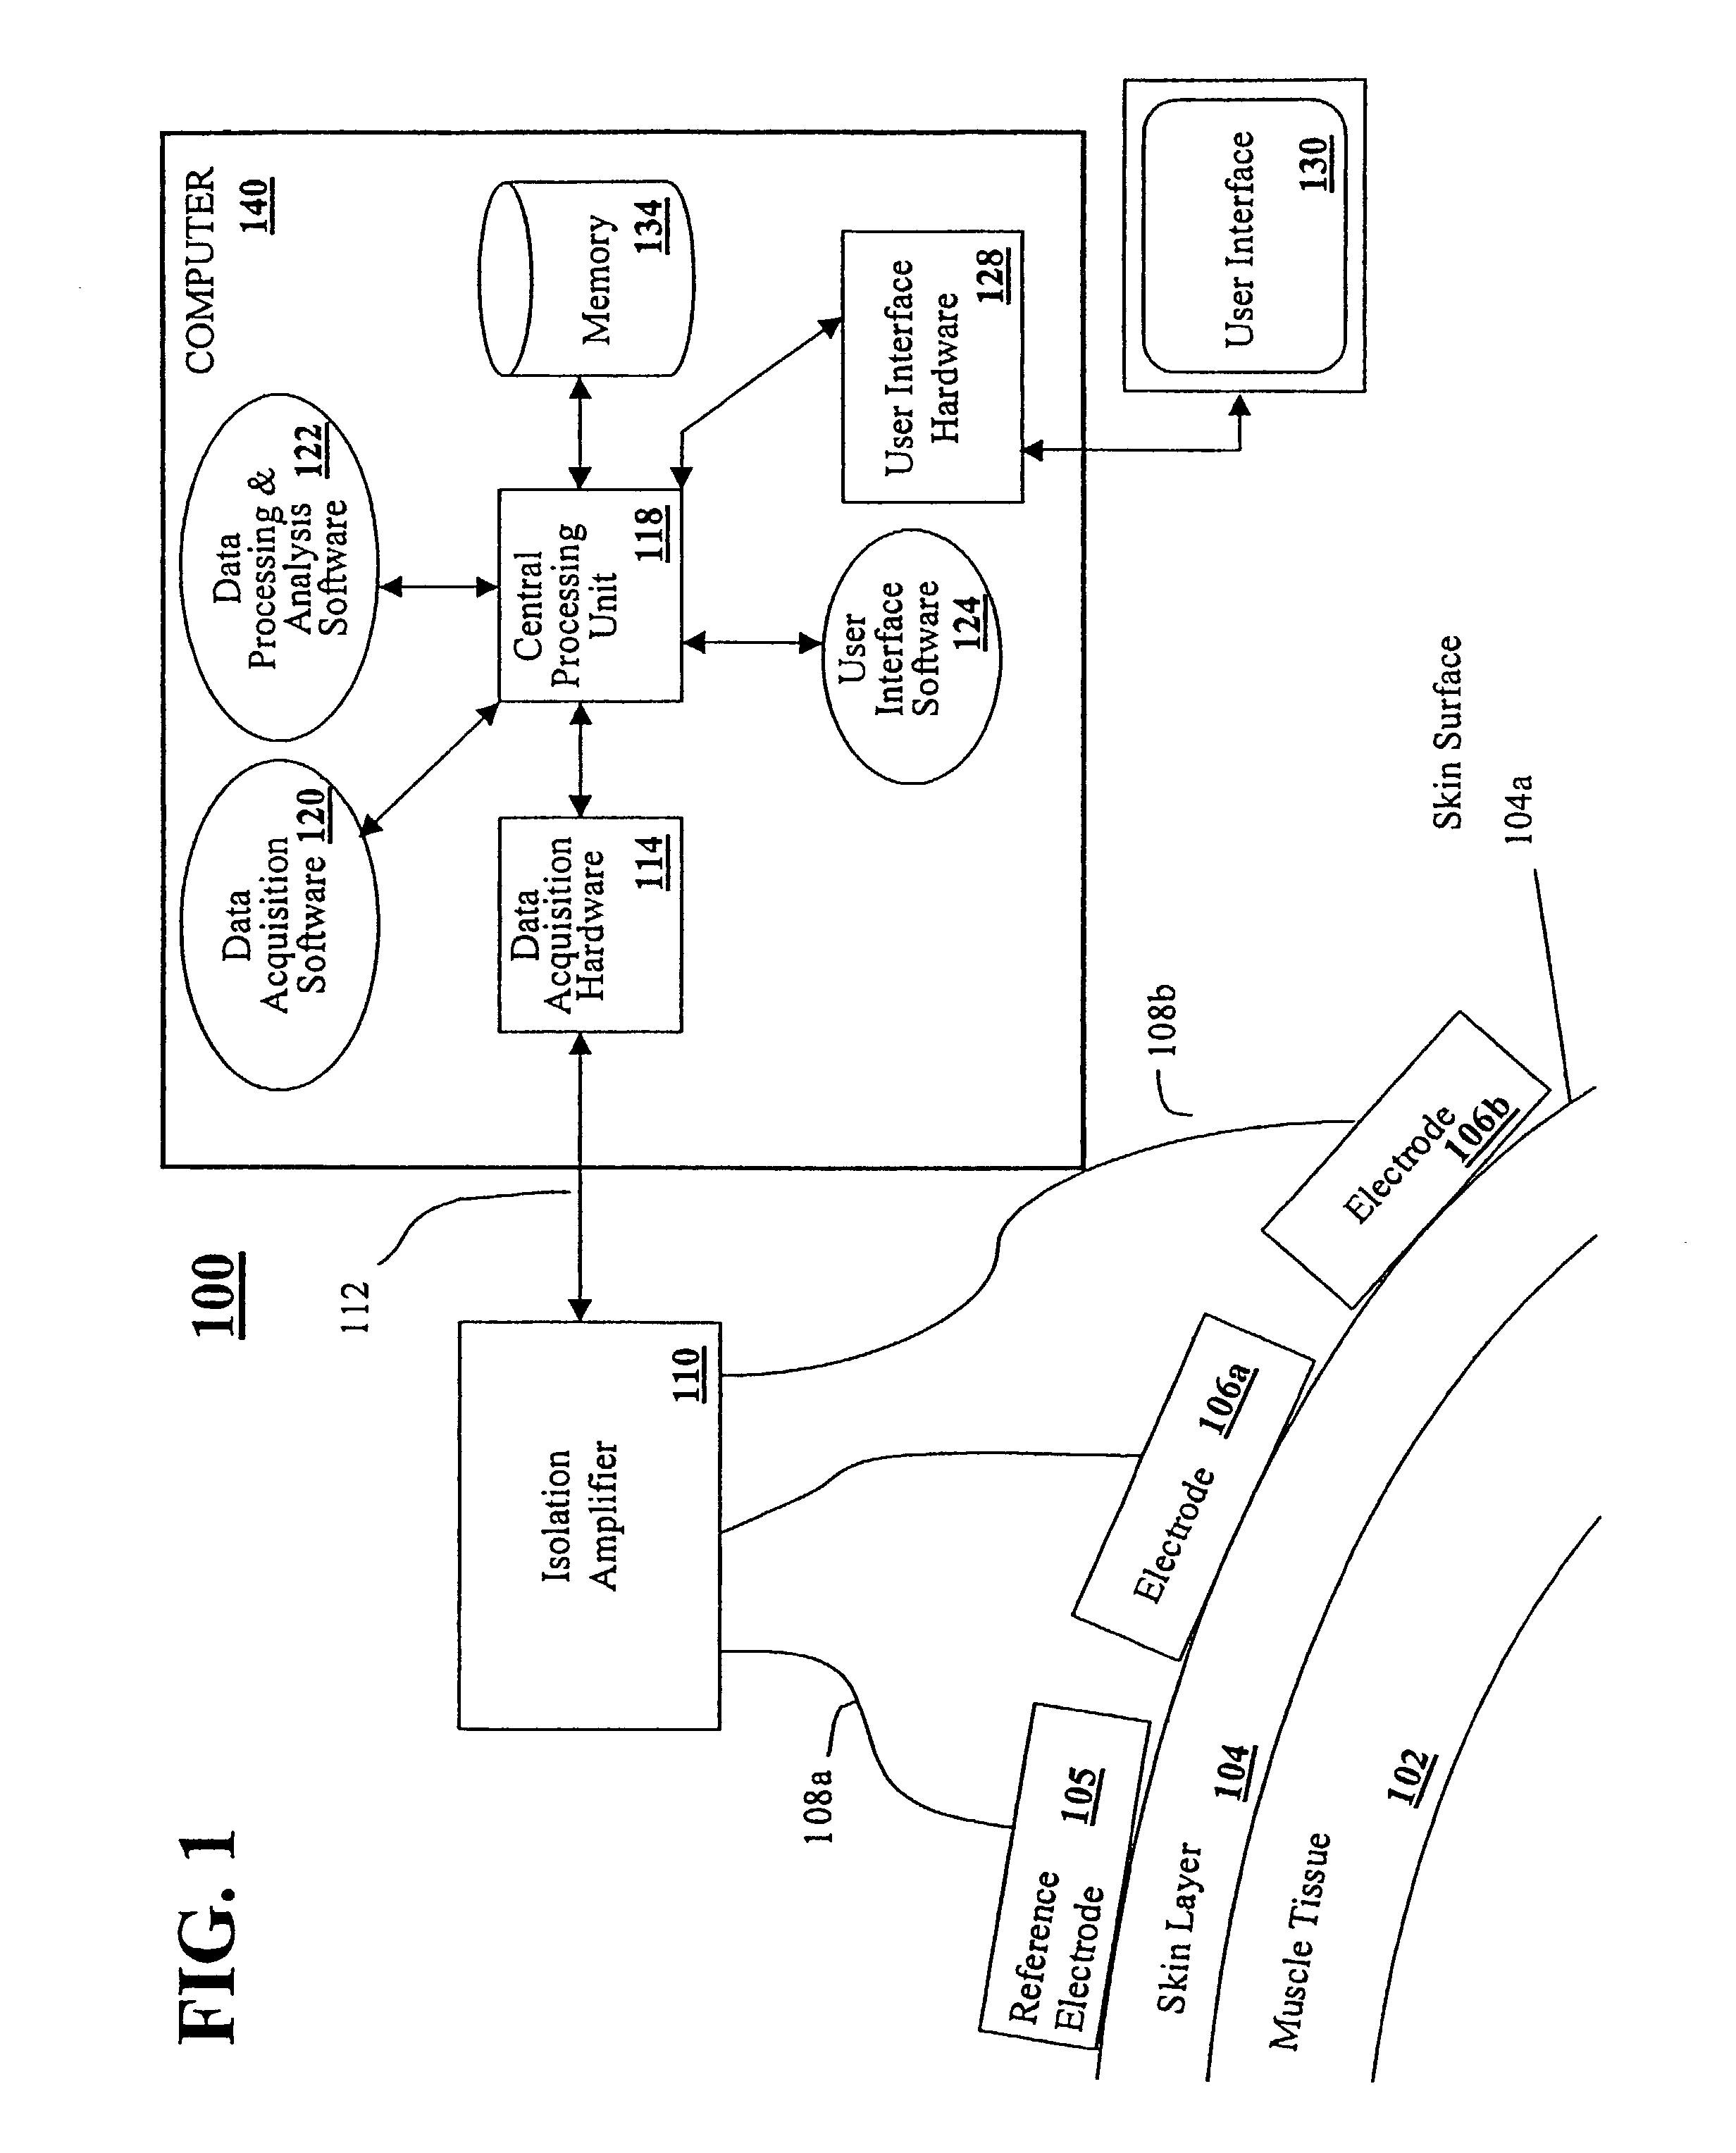 Devices and methods for the non-invasive detection of spontaneous myoelectrical activity